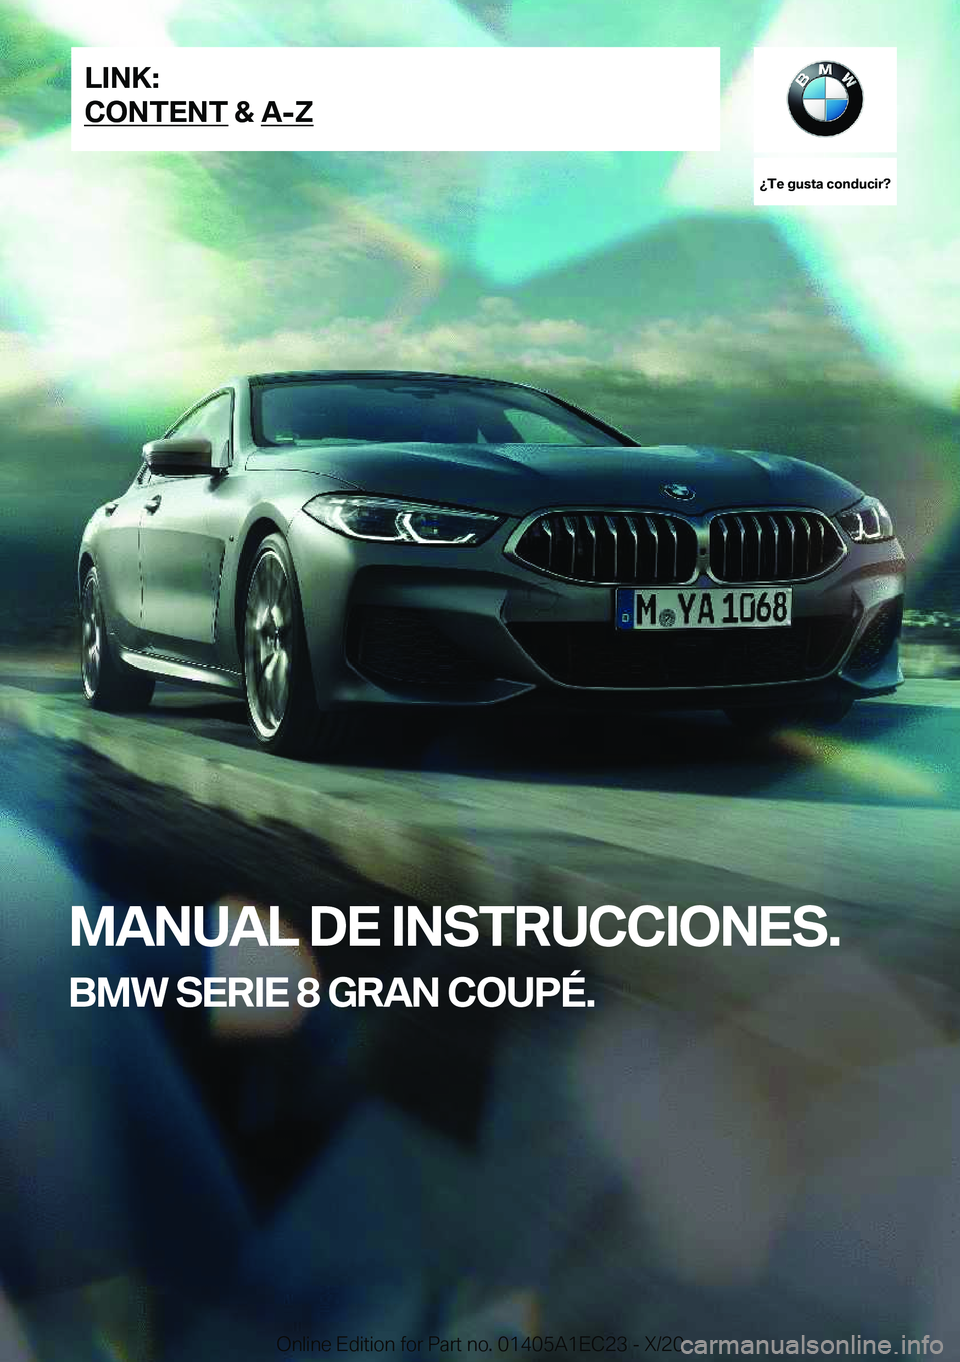 BMW 8 SERIES GRAN COUPE 2021  Manuales de Empleo (in Spanish) ��T�e��g�u�s�t�a��c�o�n�d�u�c�i�r� 
�M�A�N�U�A�L��D�E��I�N�S�T�R�U�C�C�I�O�N�E�S�.
�B�M�W��S�E�R�I�E��8��G�R�A�N��C�O�U�P�